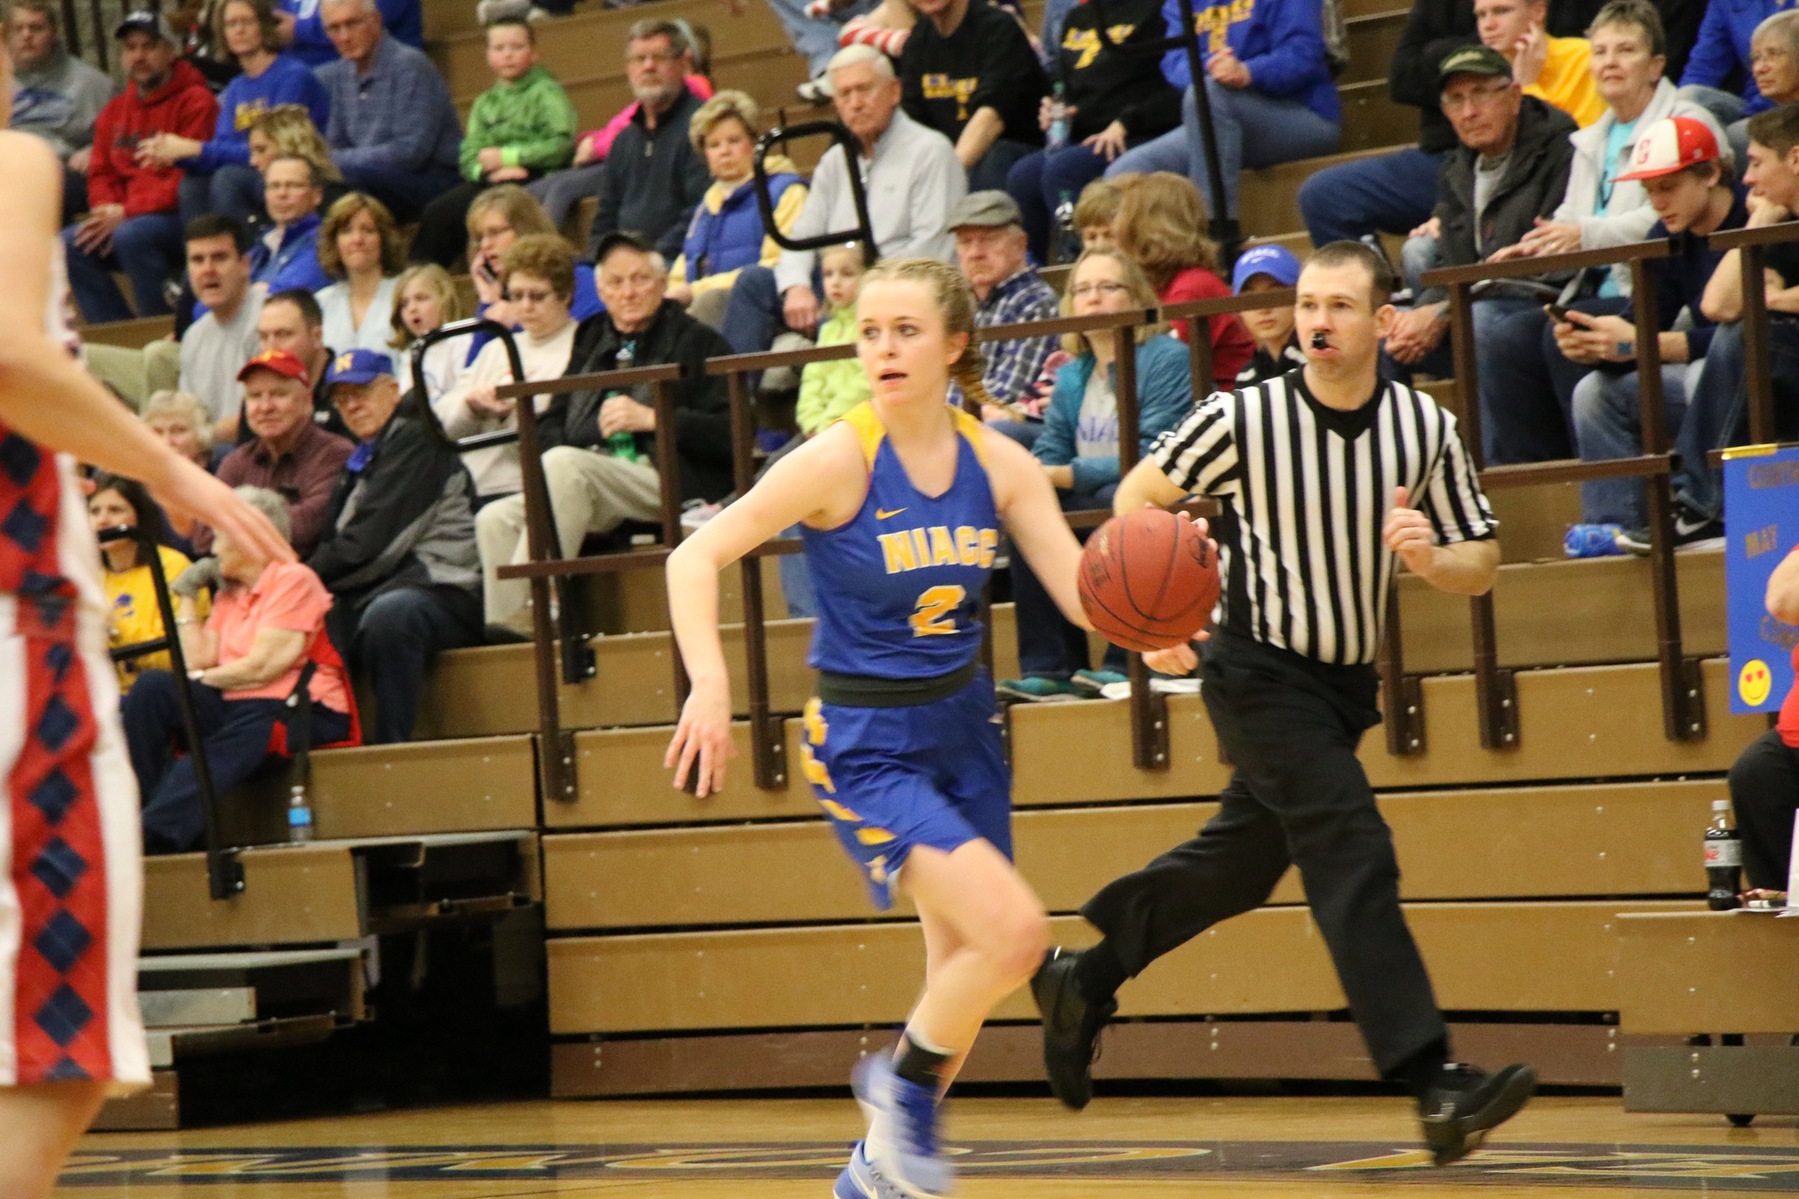 NIACC's Riley Galvin brings the ball up court in Saturday's win over Southwestern. Photo by NIACC's Jim Zach.